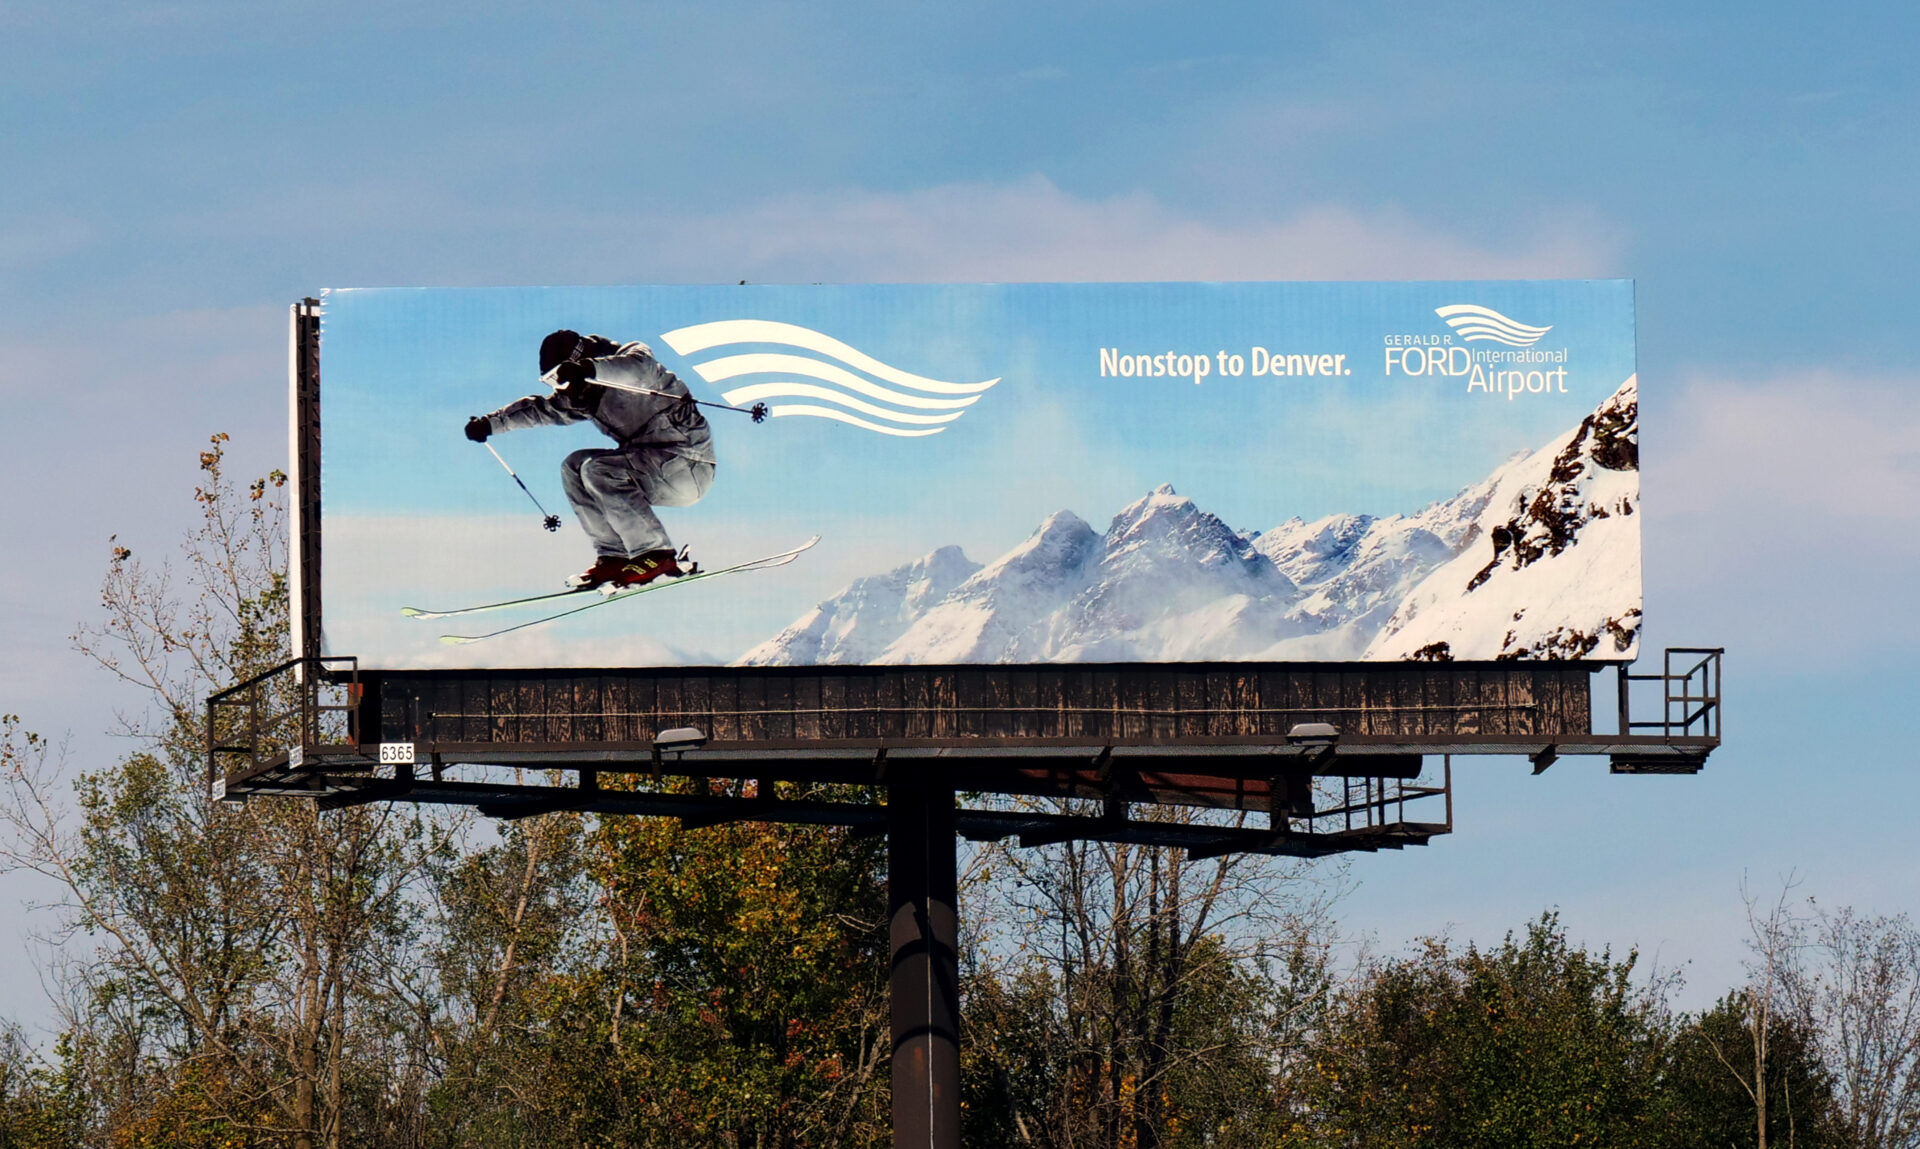 Out of home brand campaign for Gerald R. Ford International Airport. Nonstop to Denver